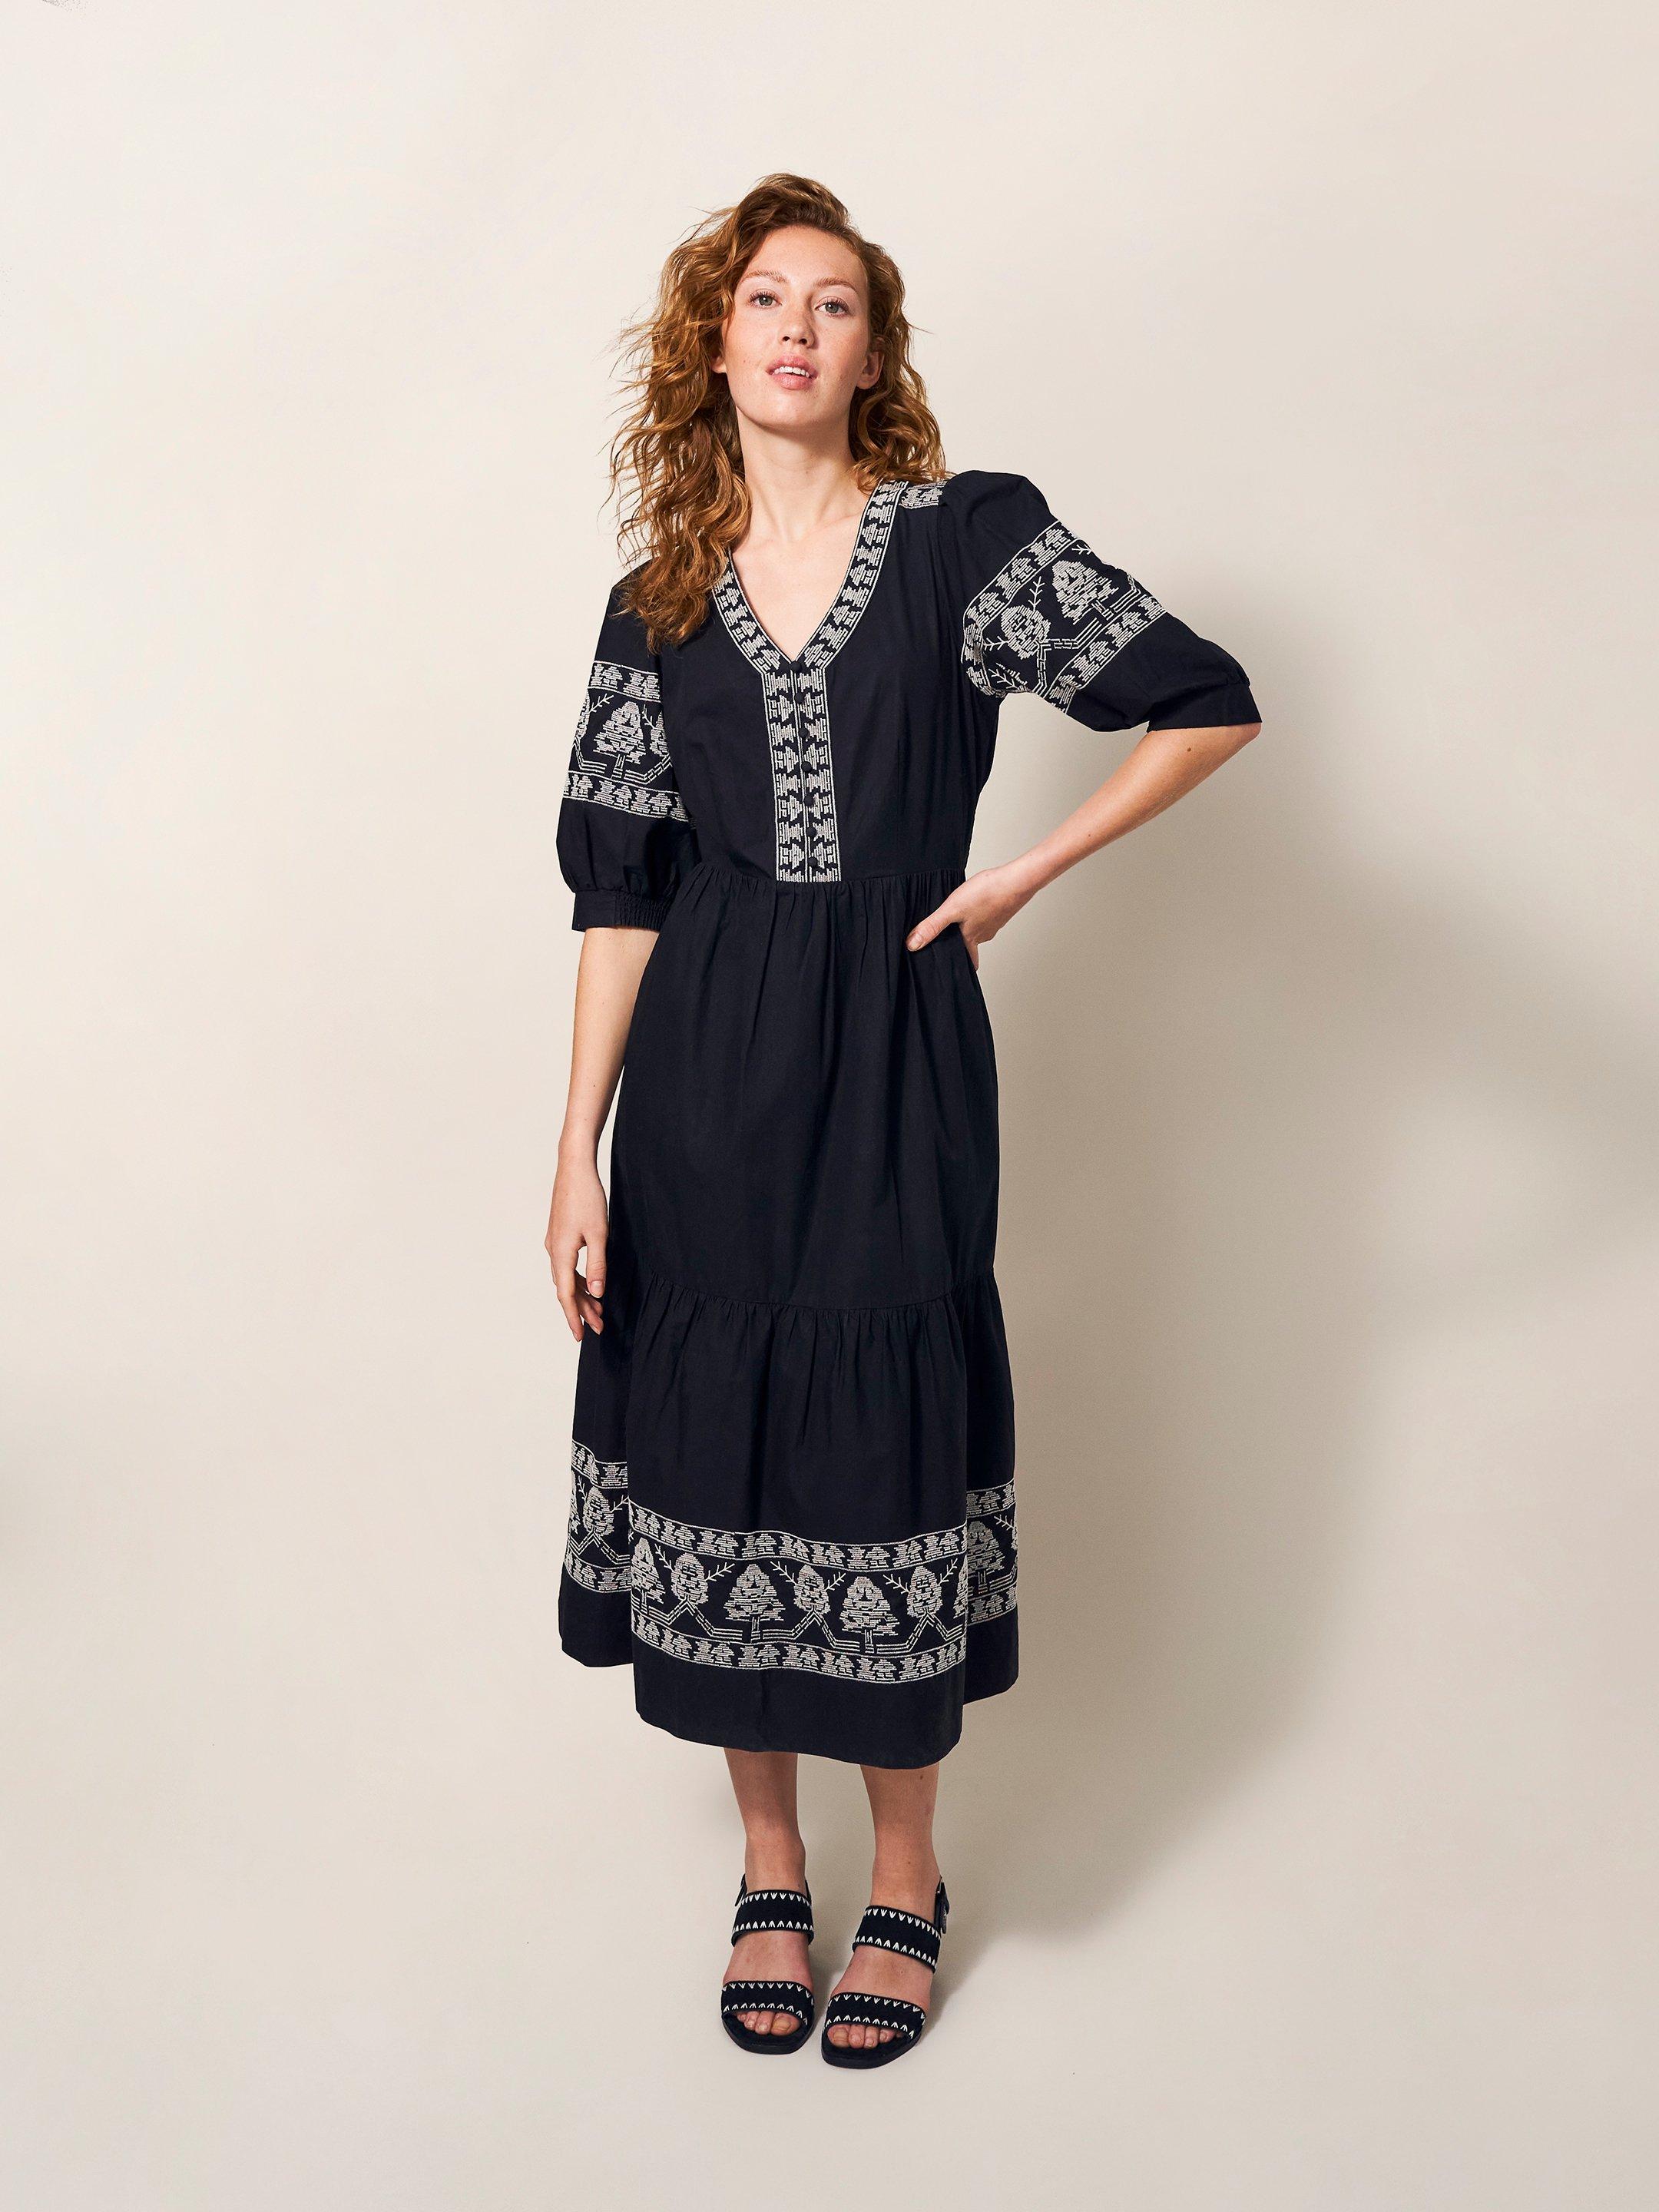 Dulcie Embroidered Midi Dress in BLK MLT - LIFESTYLE